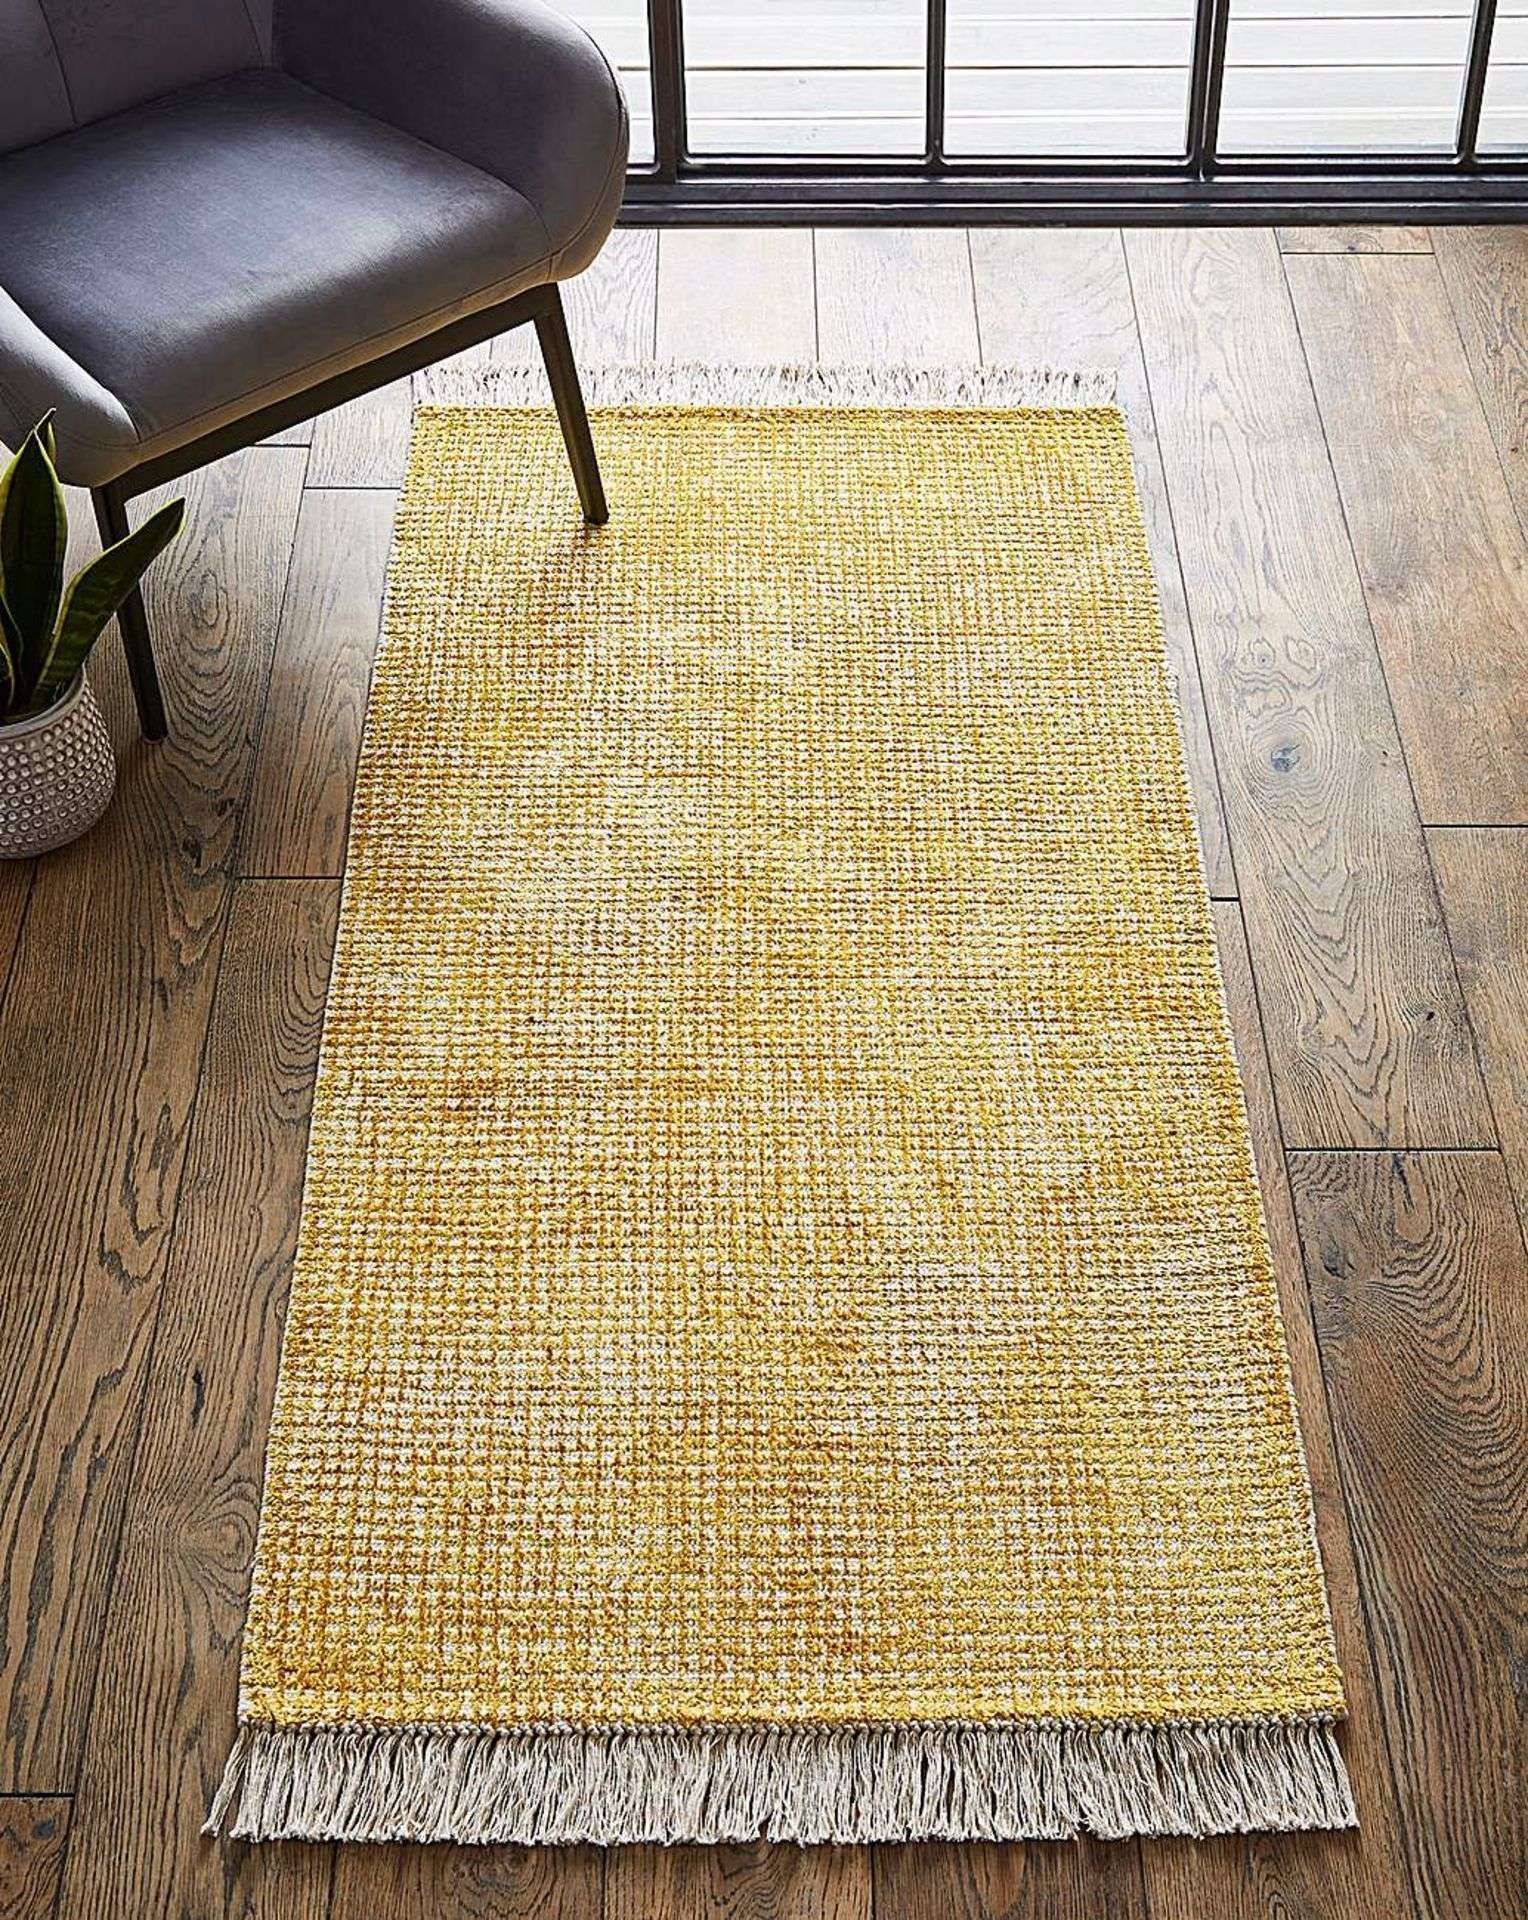 3x BRAND NEW Hallie Woven Fringe Rug 60CM X 110CM. NUGGET GOLD. RRP £40 EACH. A woven design that is